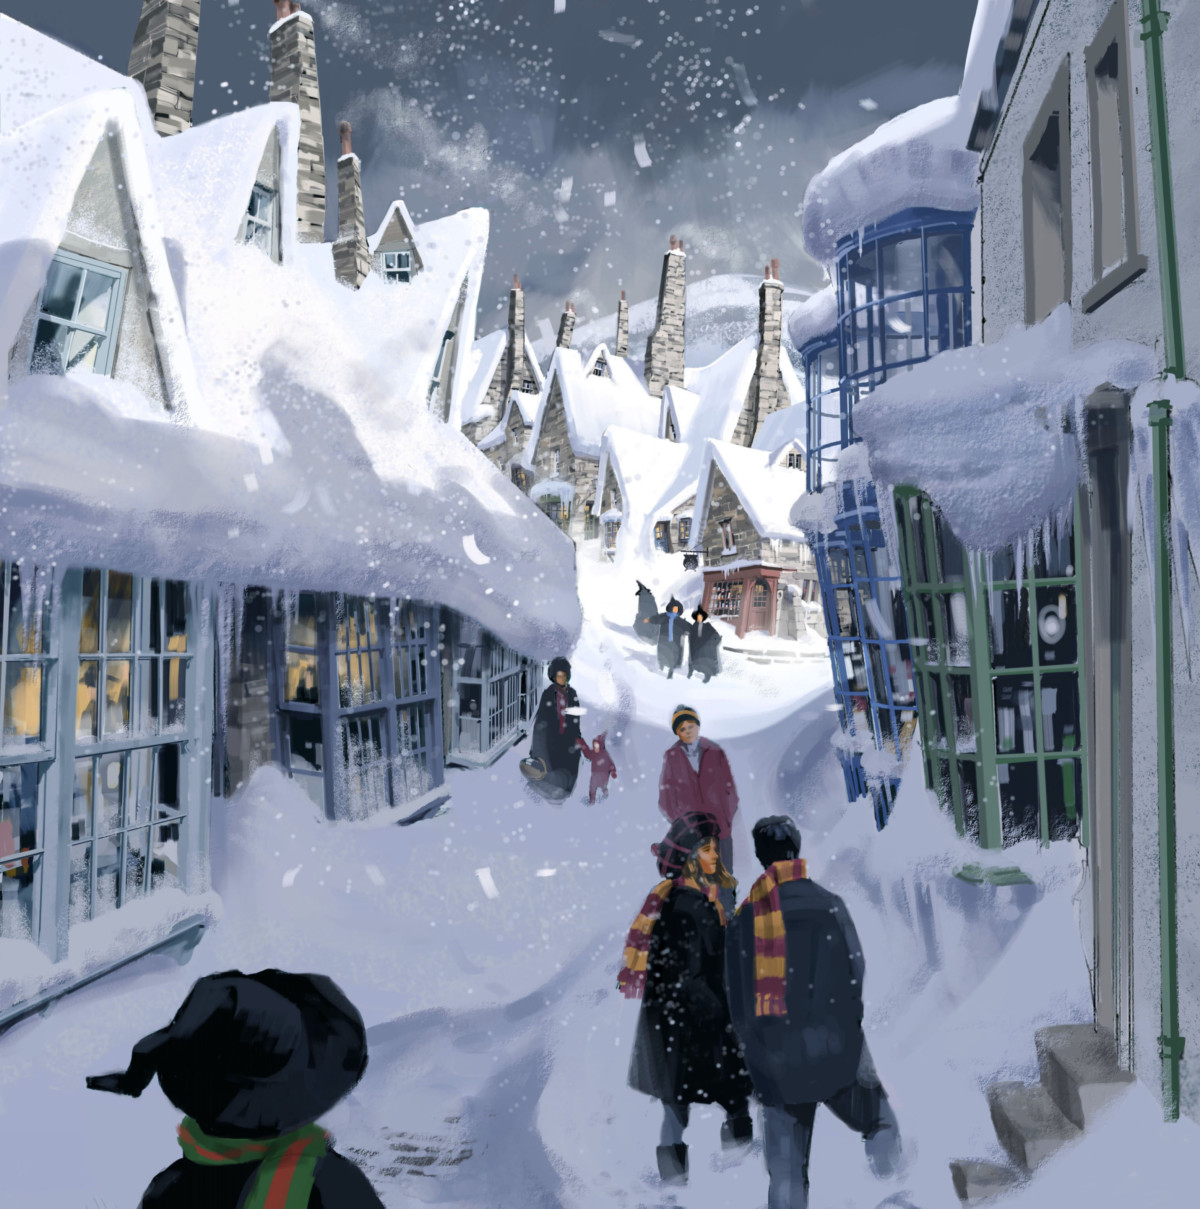 All they want for Christmas: A Harry Potter gift guide